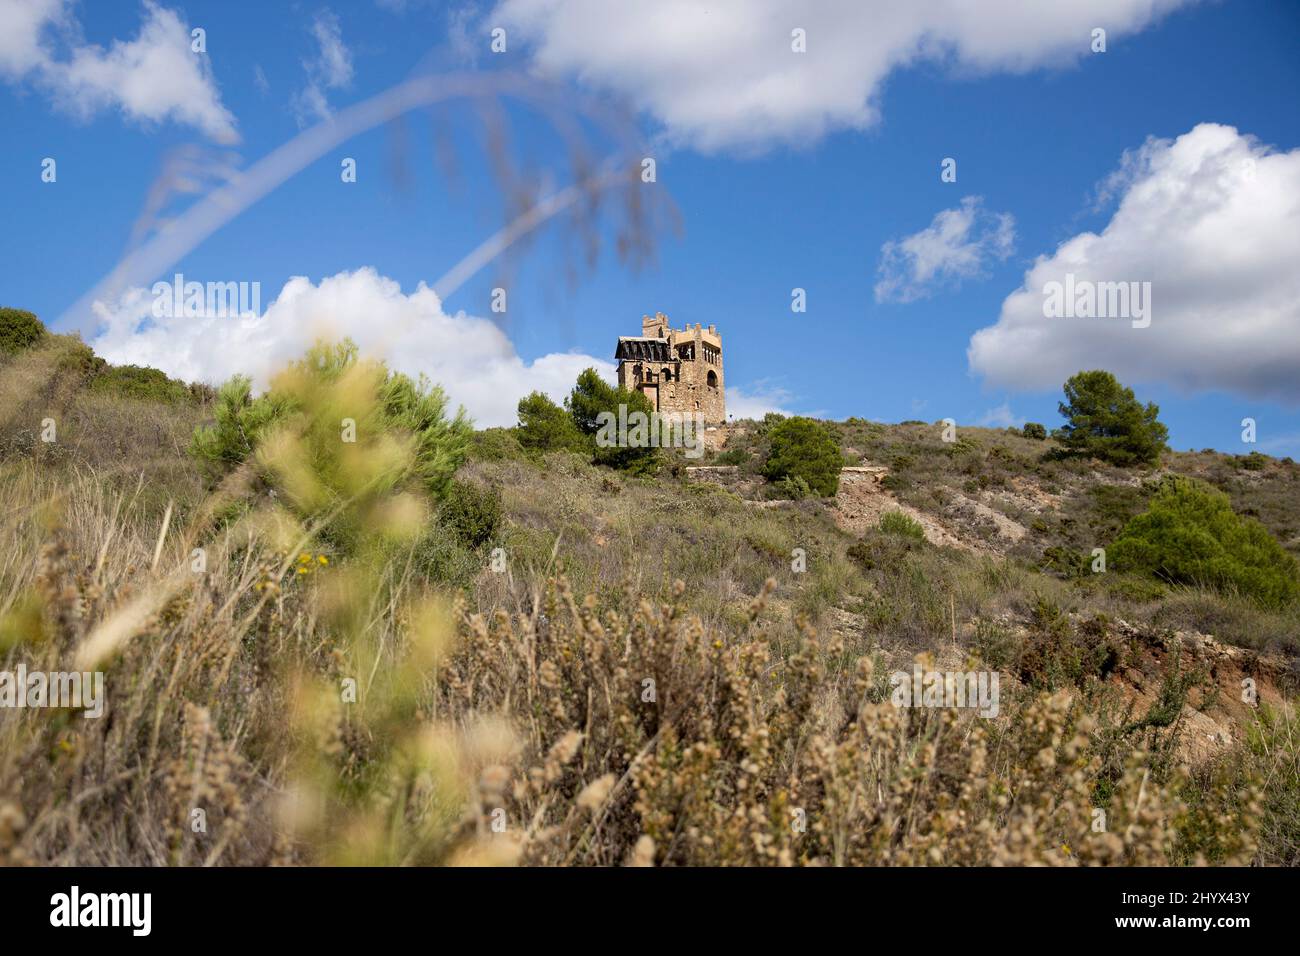 Old and abandoned Tower water tank in Alhaurin el Grande, Malaga, Spain Stock Photo